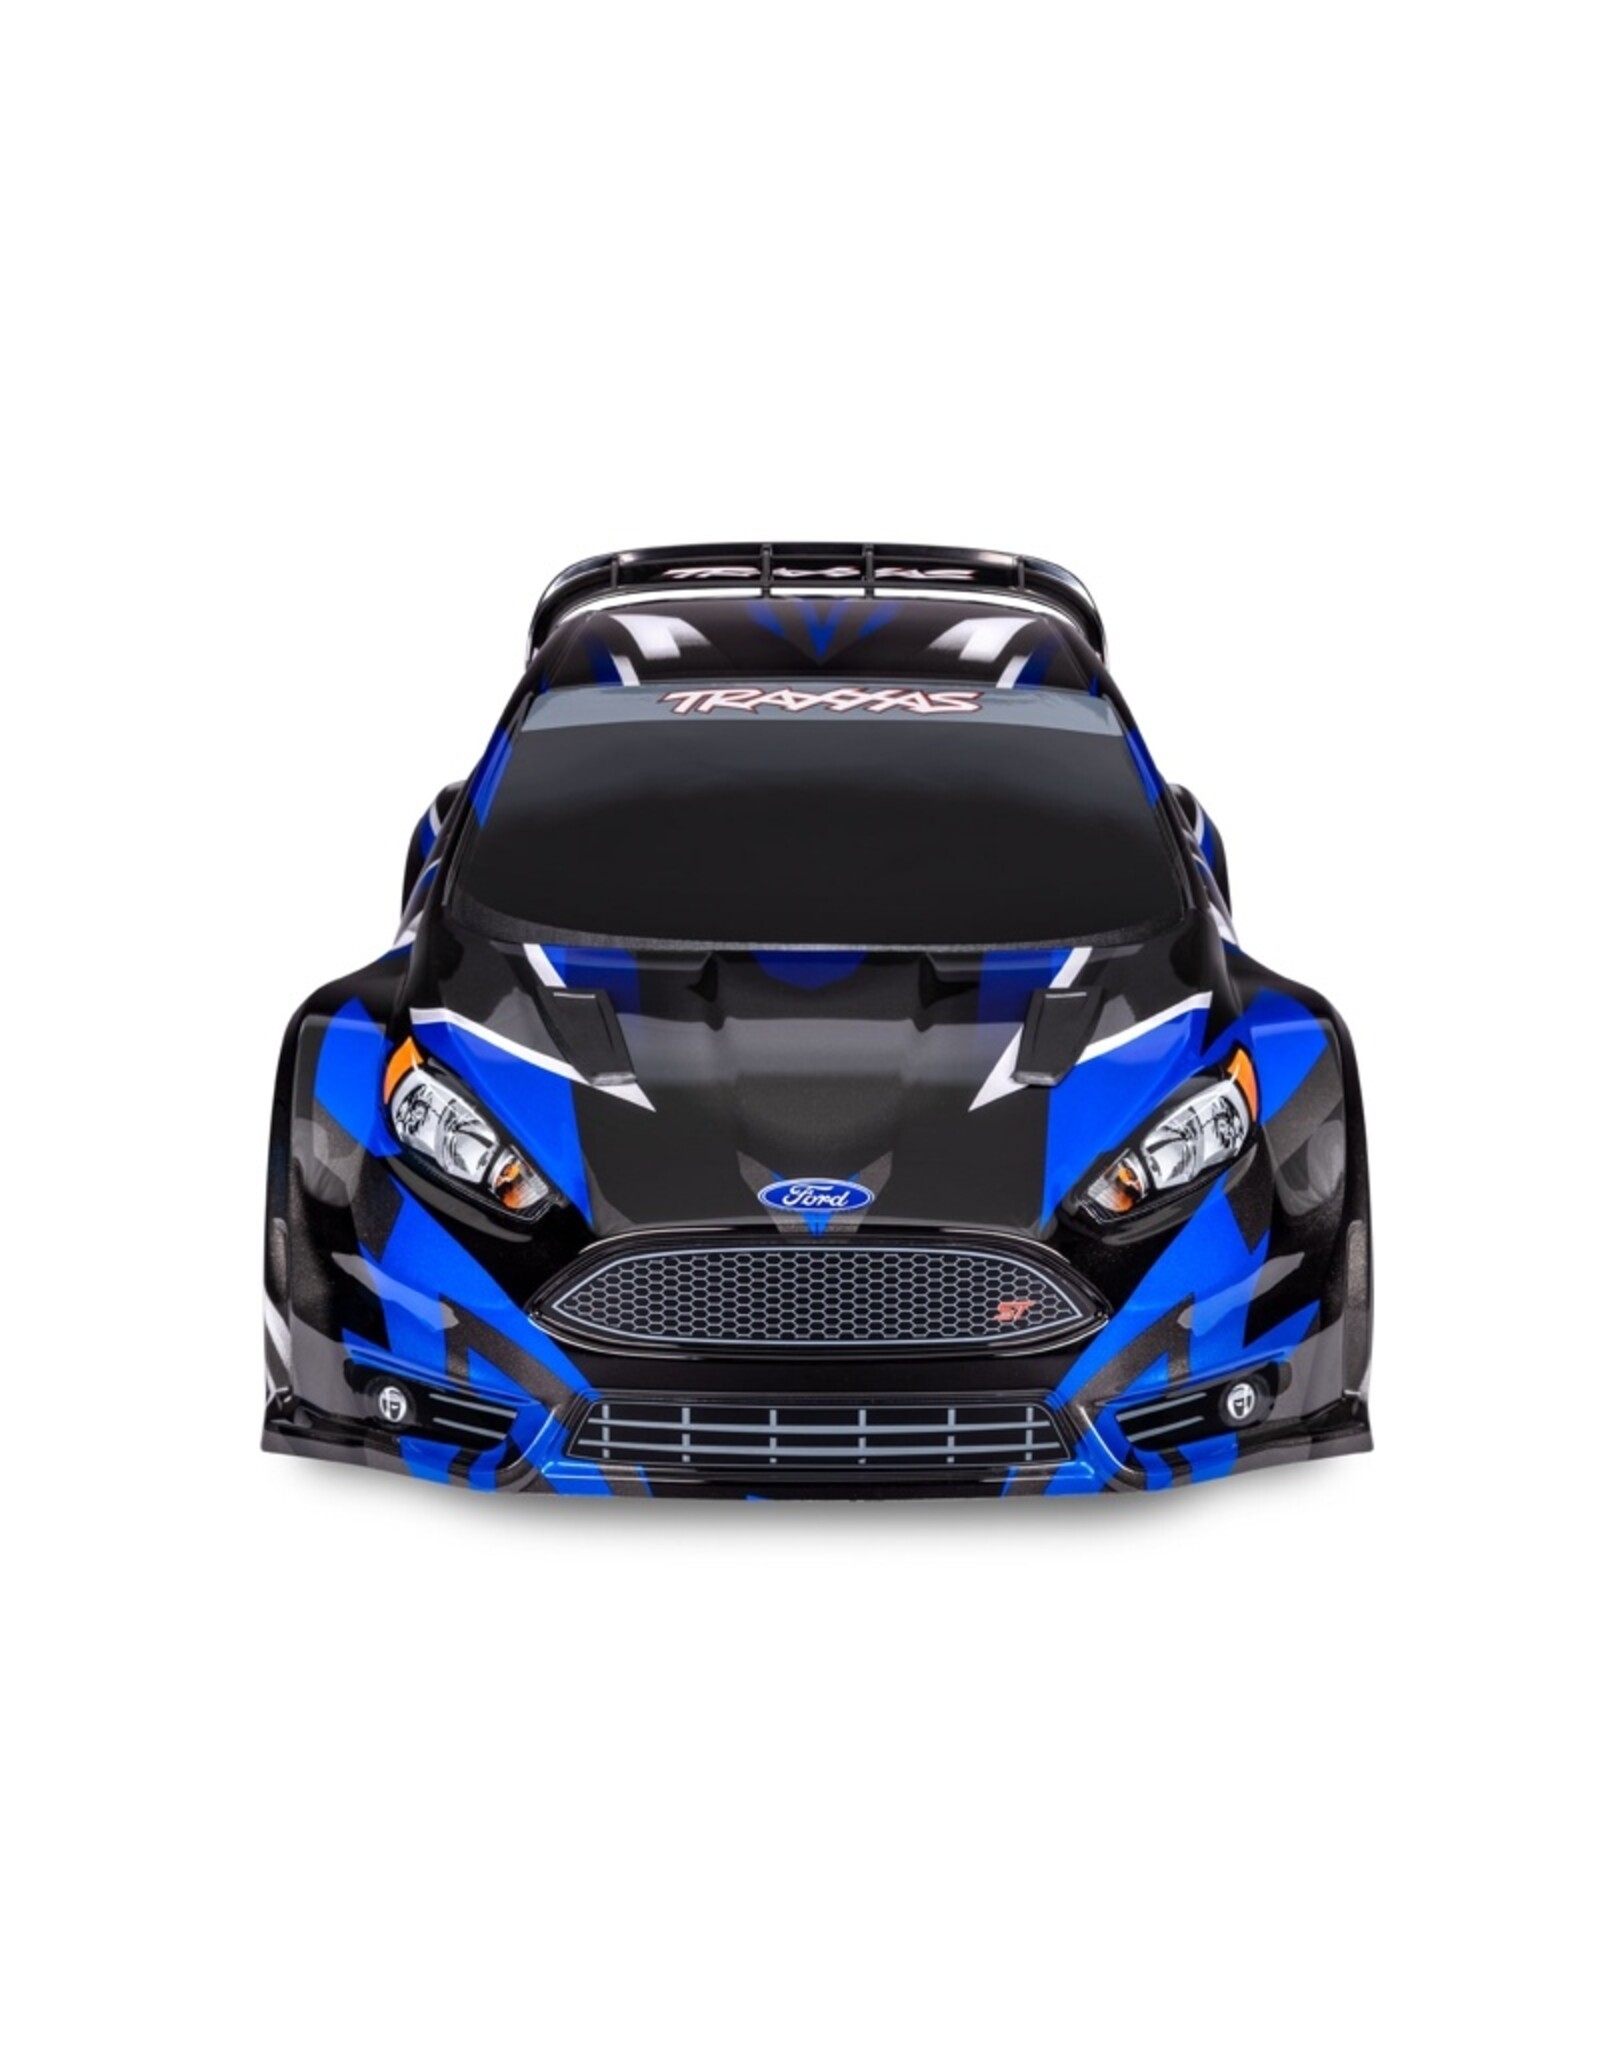 Traxxas TRA74154-4 Ford Fiesta ST Rally BL-2s BLUE